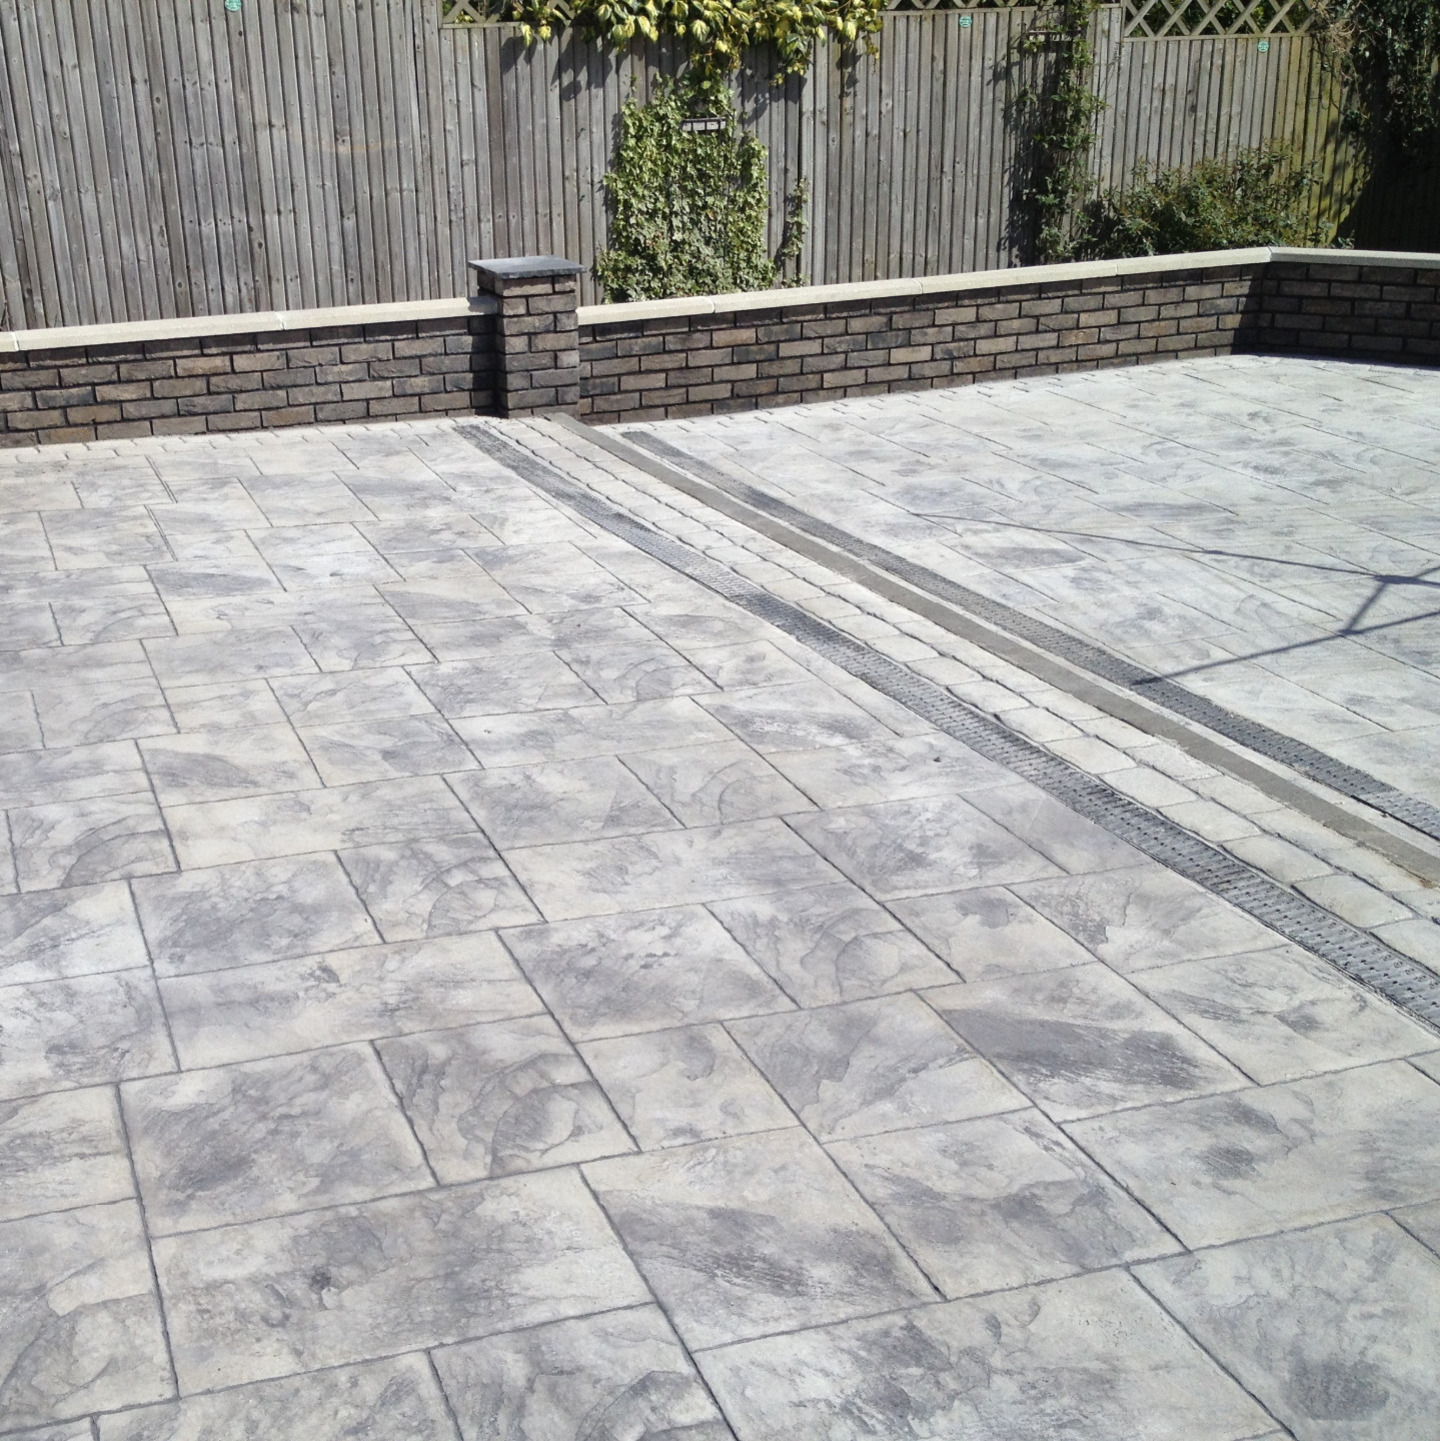 Imprinted slate grey concrete patio with built in Aco drianage channels